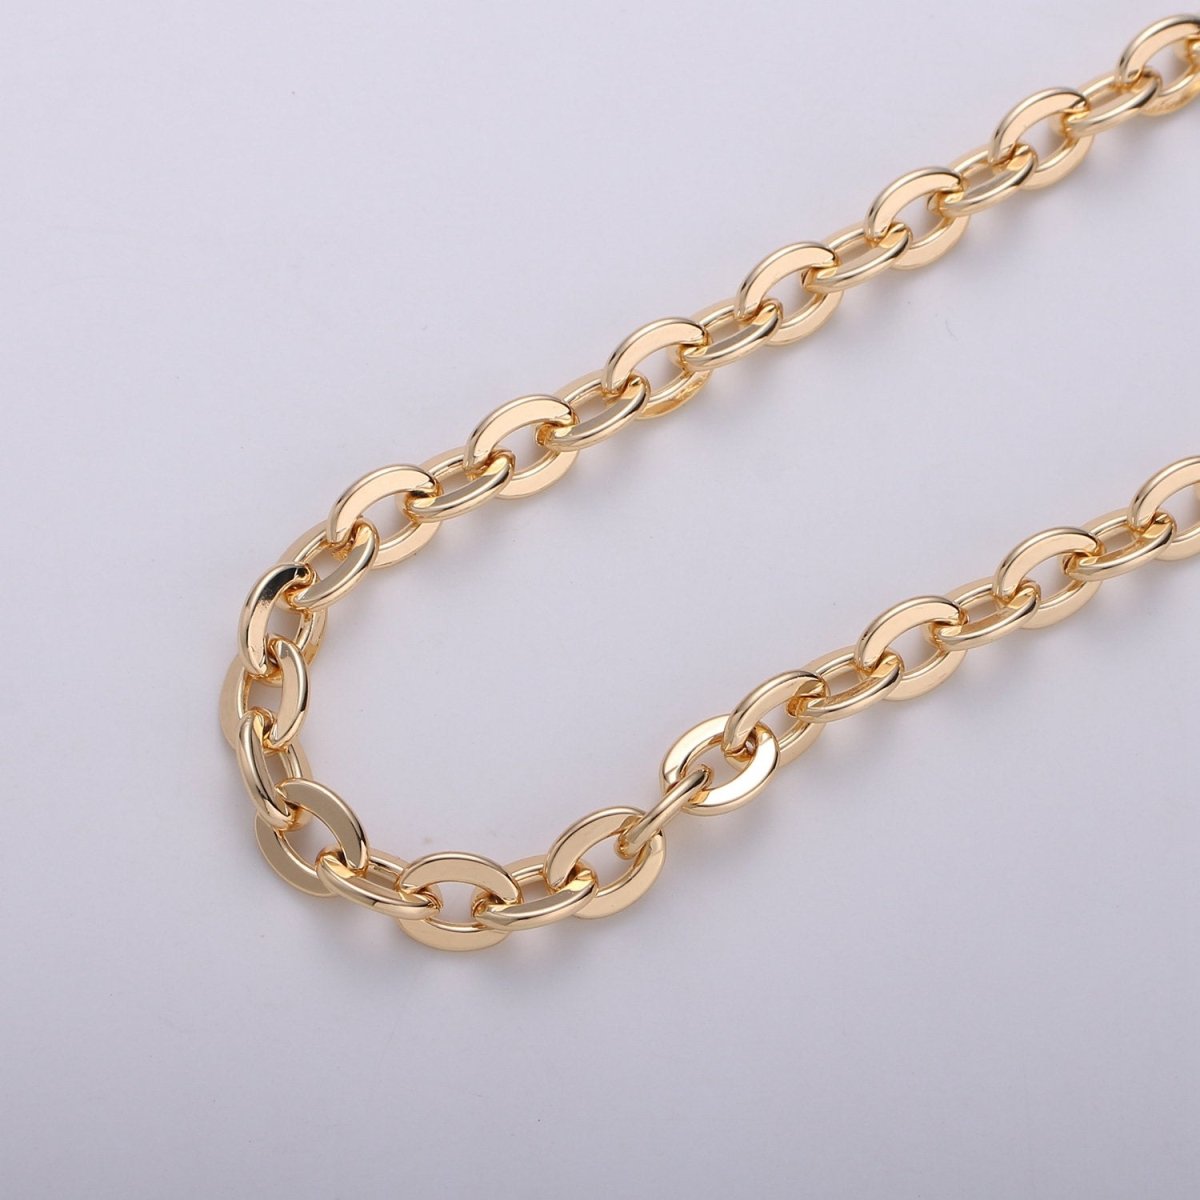 Thick ROLO Cable Chain 7X8mm, 18K Gold Filled Brass, Nickel Free, Medium Flat Minimalist Jewelry making, Necklace chain | ROLL-285 Clearance Pricing - DLUXCA